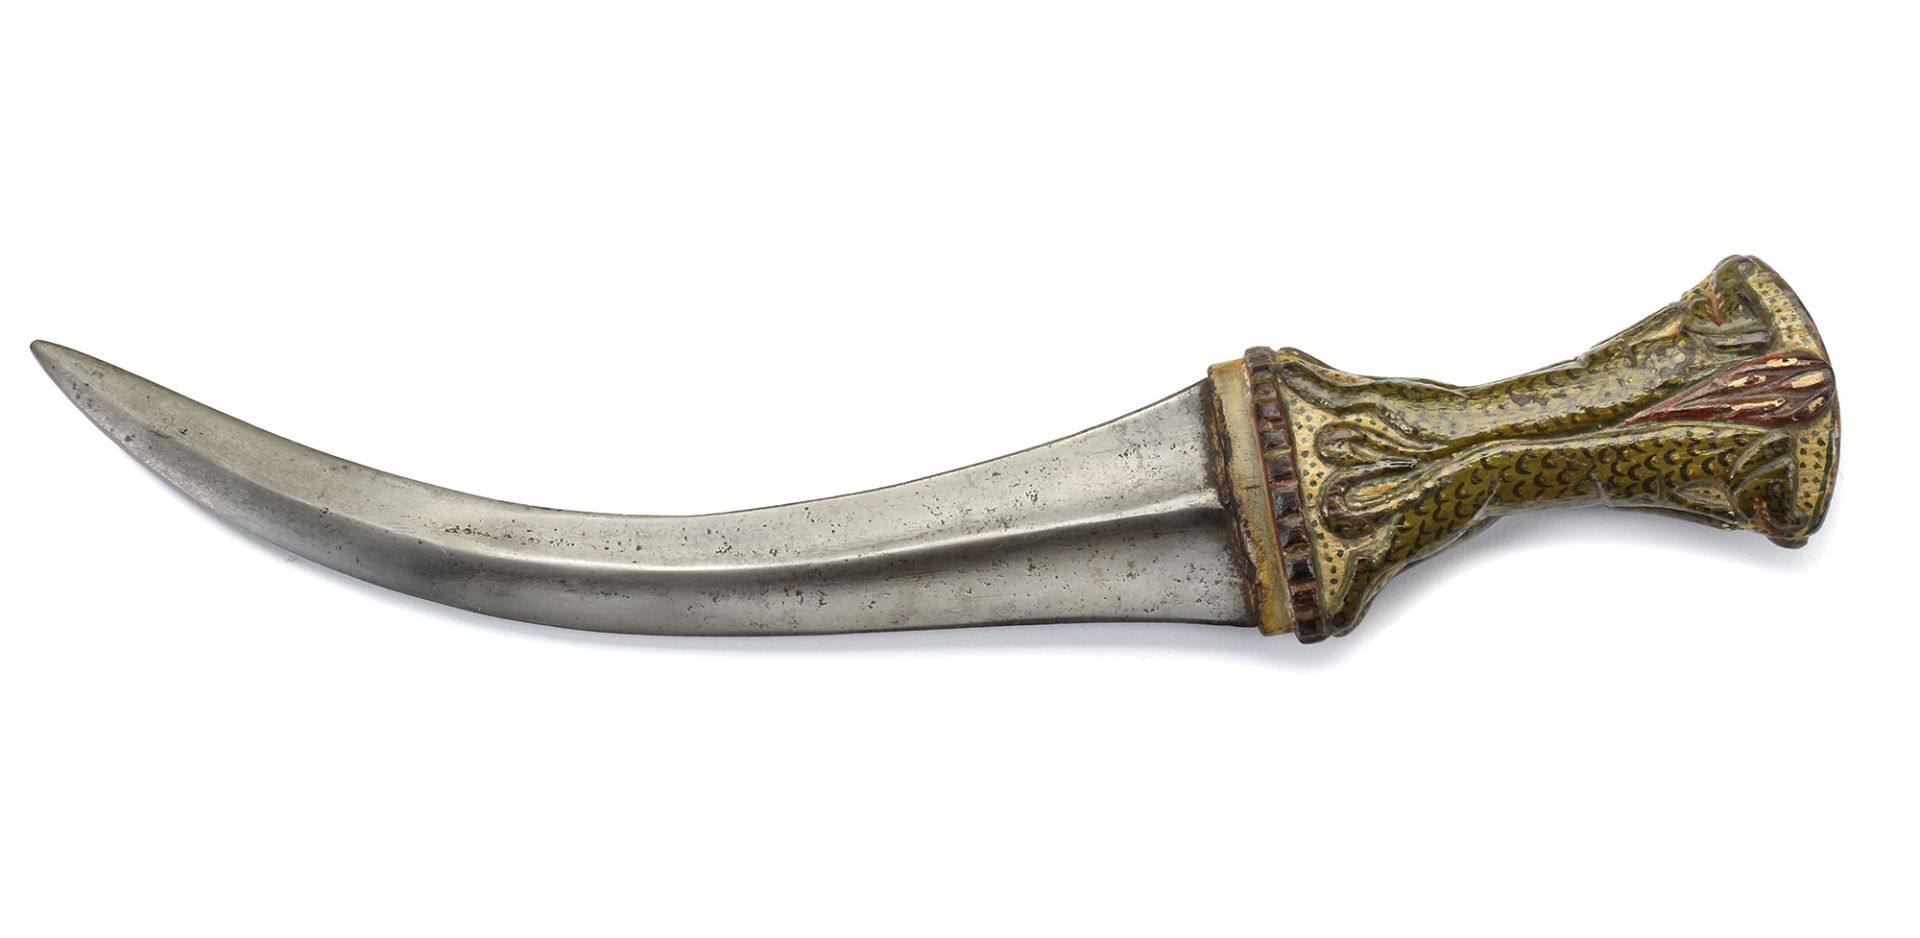 A MUGHAL DAGGER WITH WOODEN HILT, NORTH-INDIA, 19TH CENTURY - Image 2 of 4